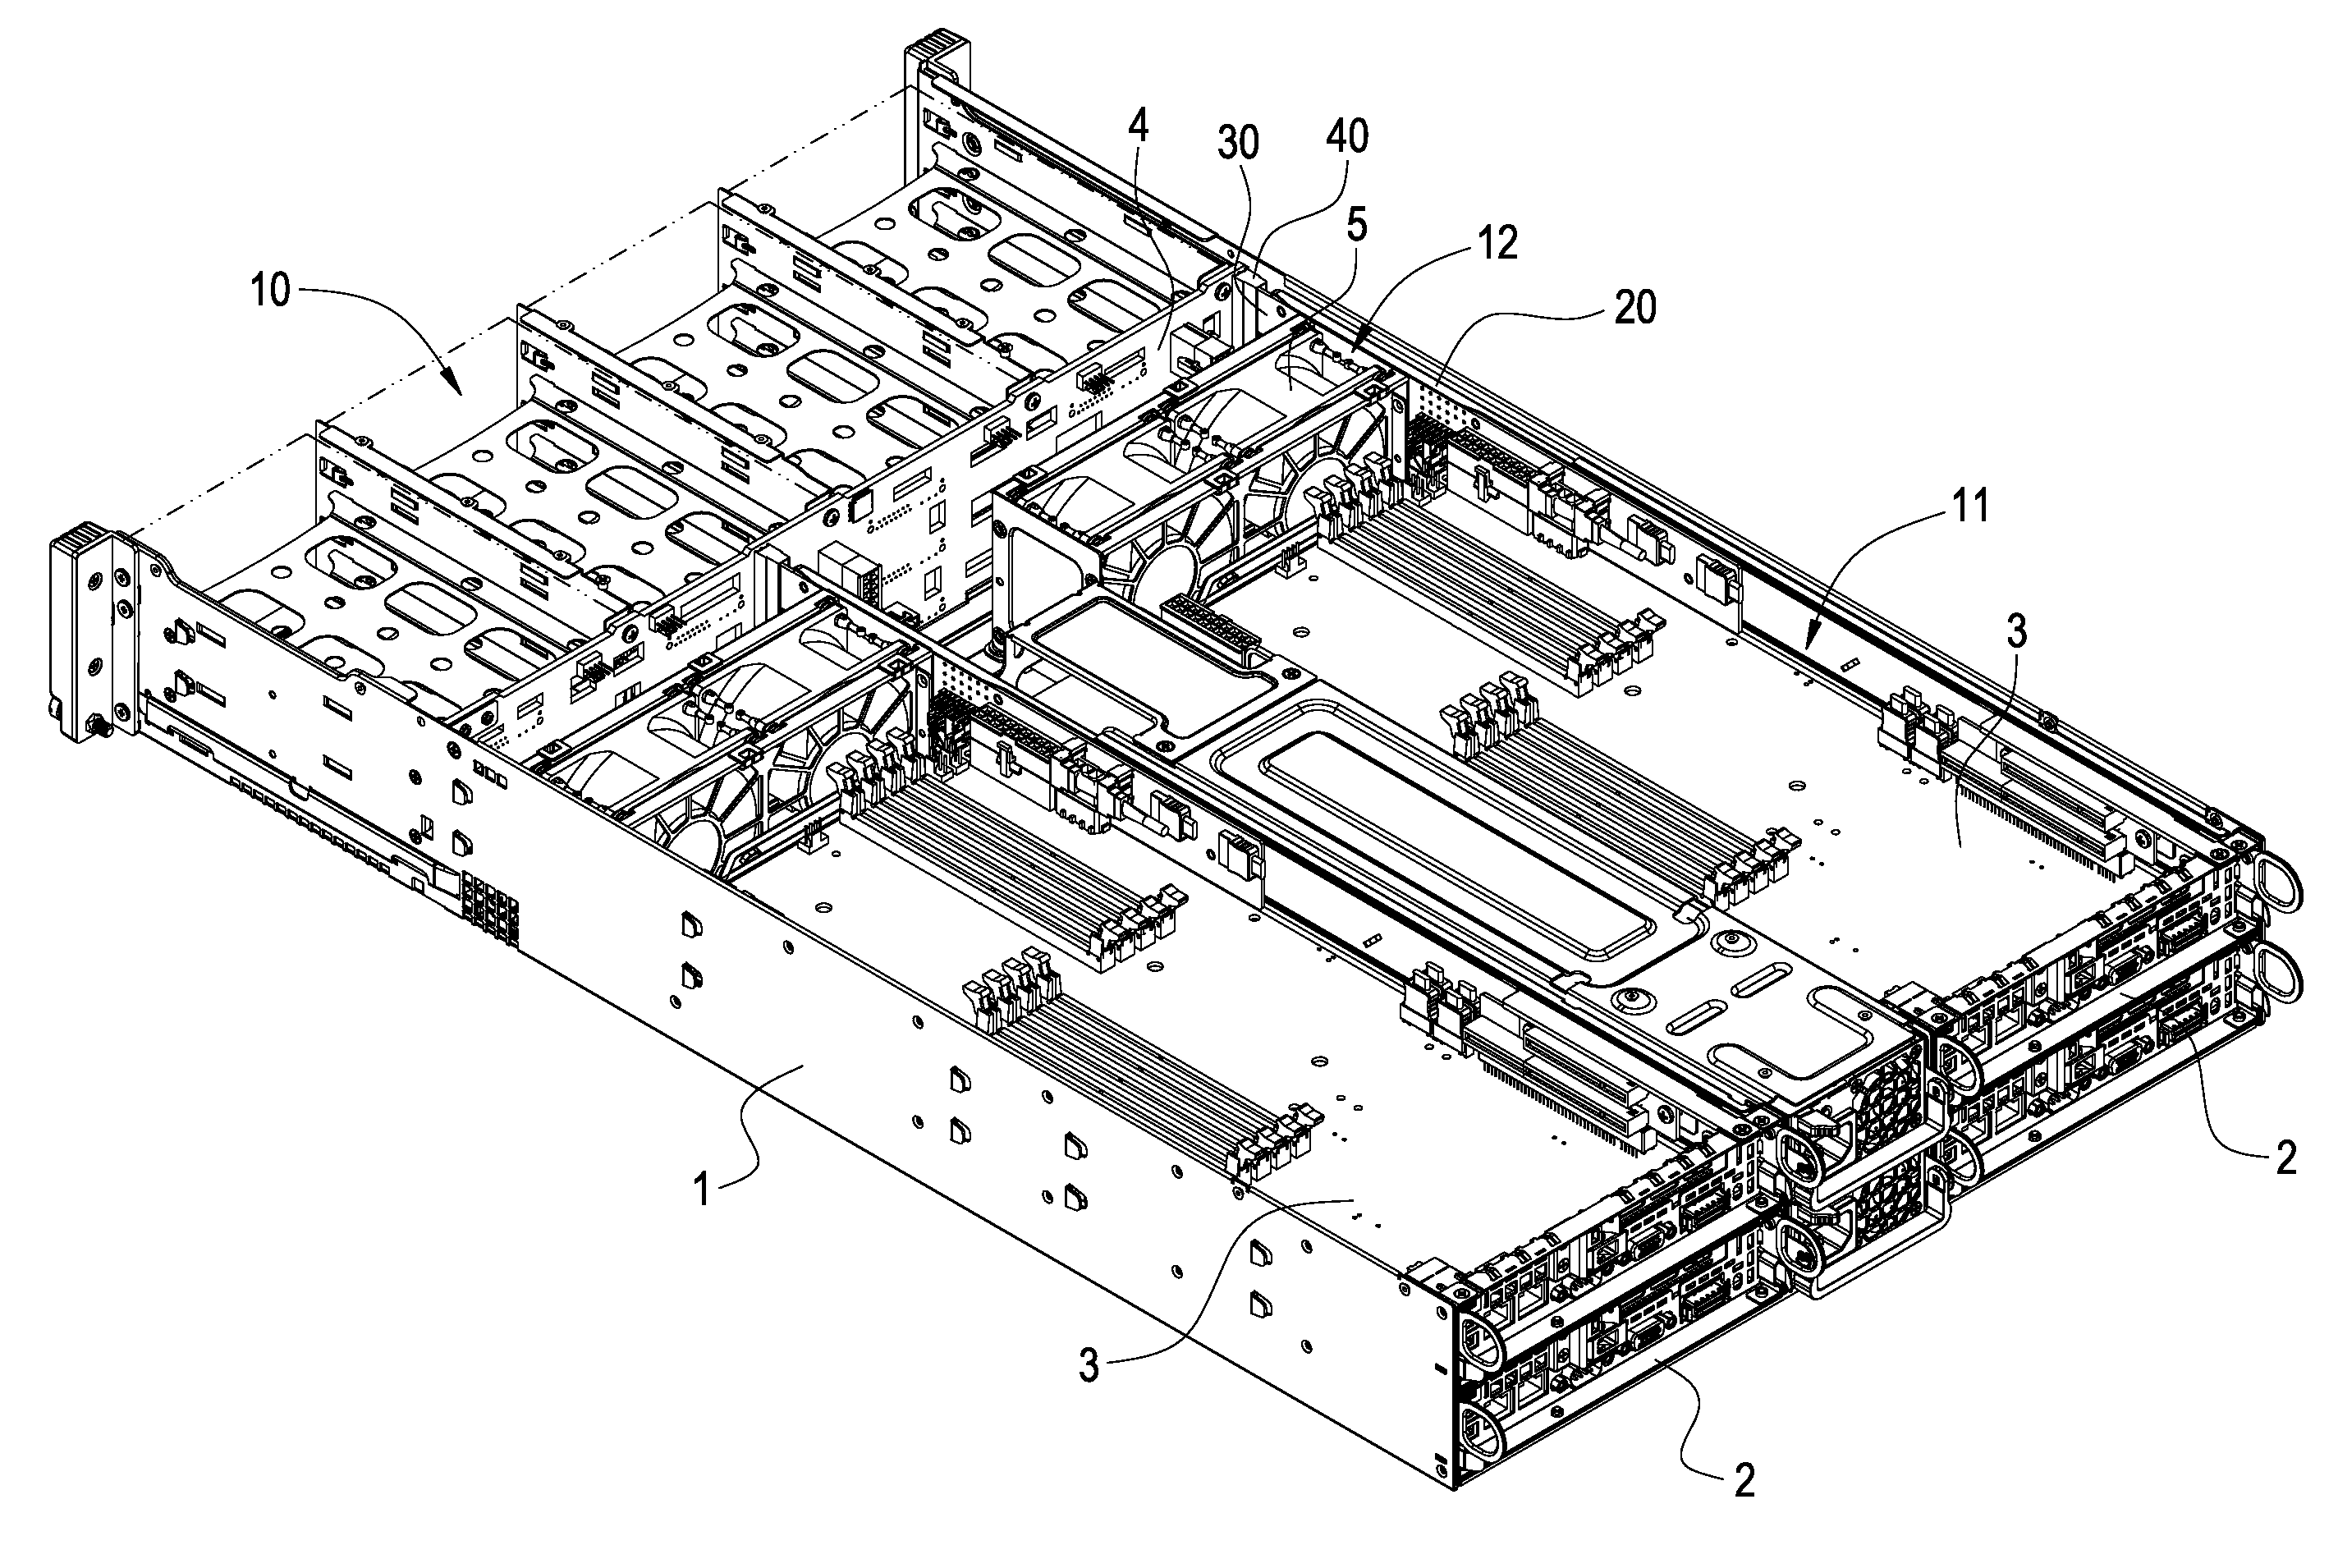 Disposing structure for hot swappable motherboard in industrial computer chassis